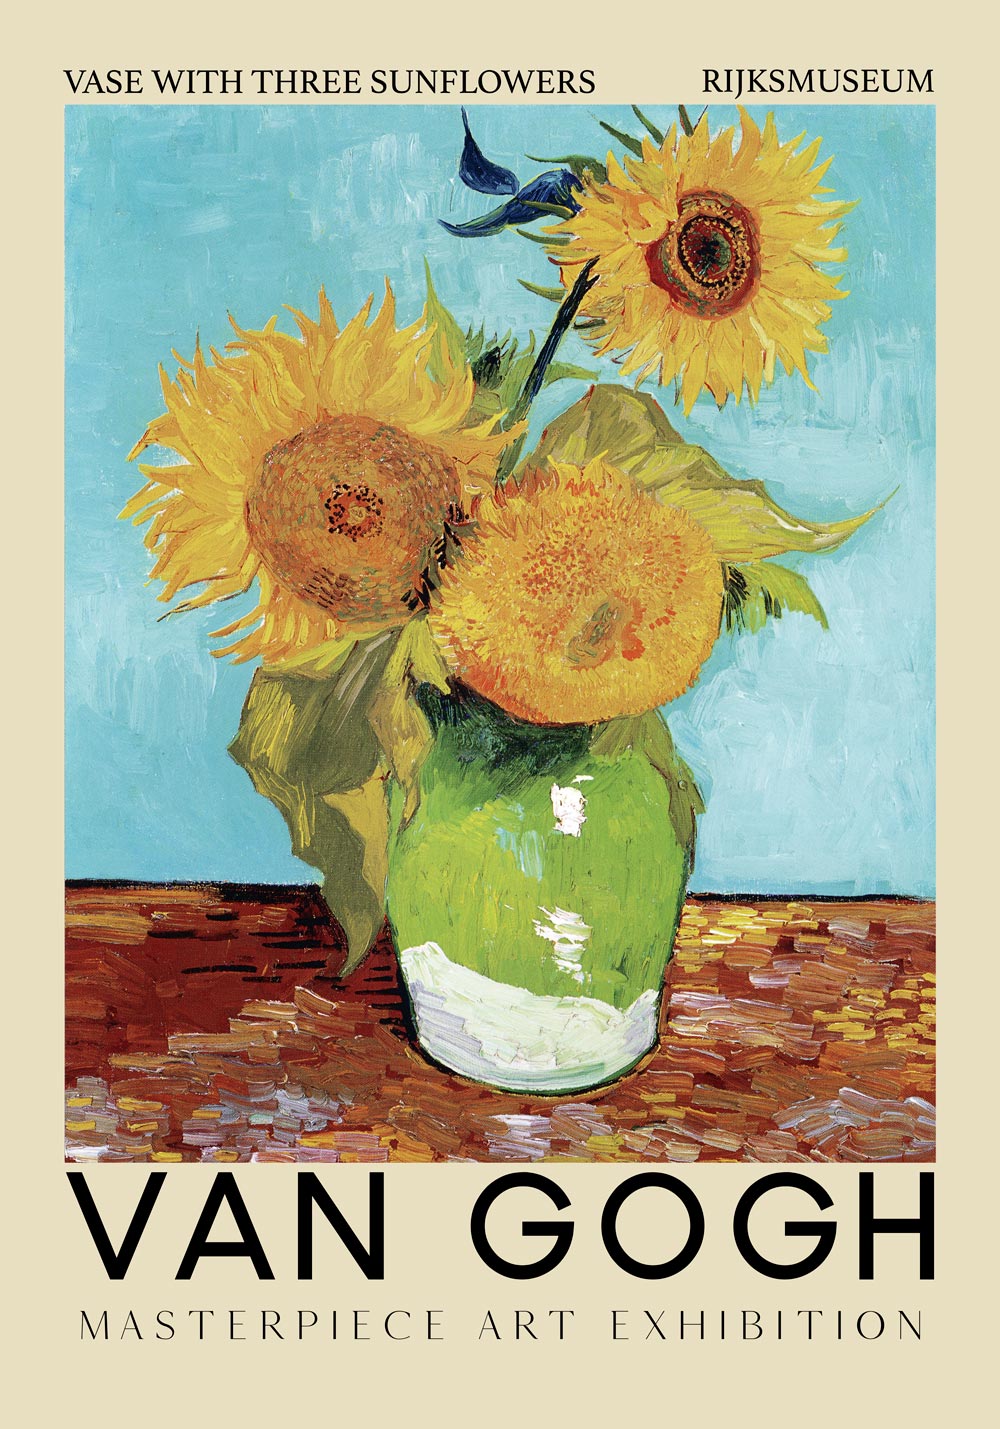 Vase with Three Sunflowers Art Exhibition Poster by Van Gogh